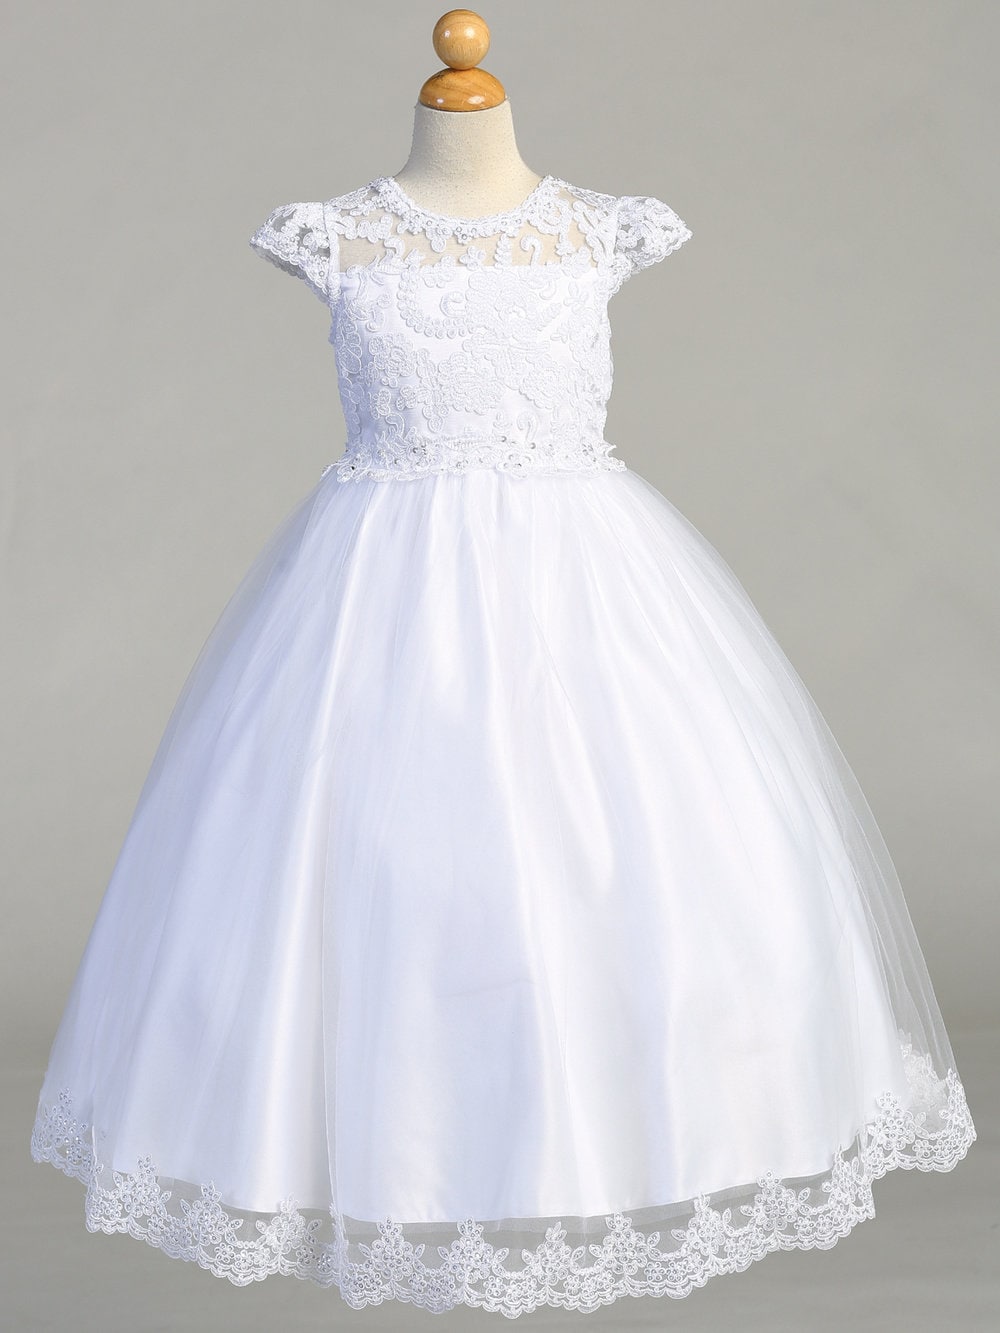 A side view of the First Communion Dress showing the cap sleeves and the tea-length of the dress.